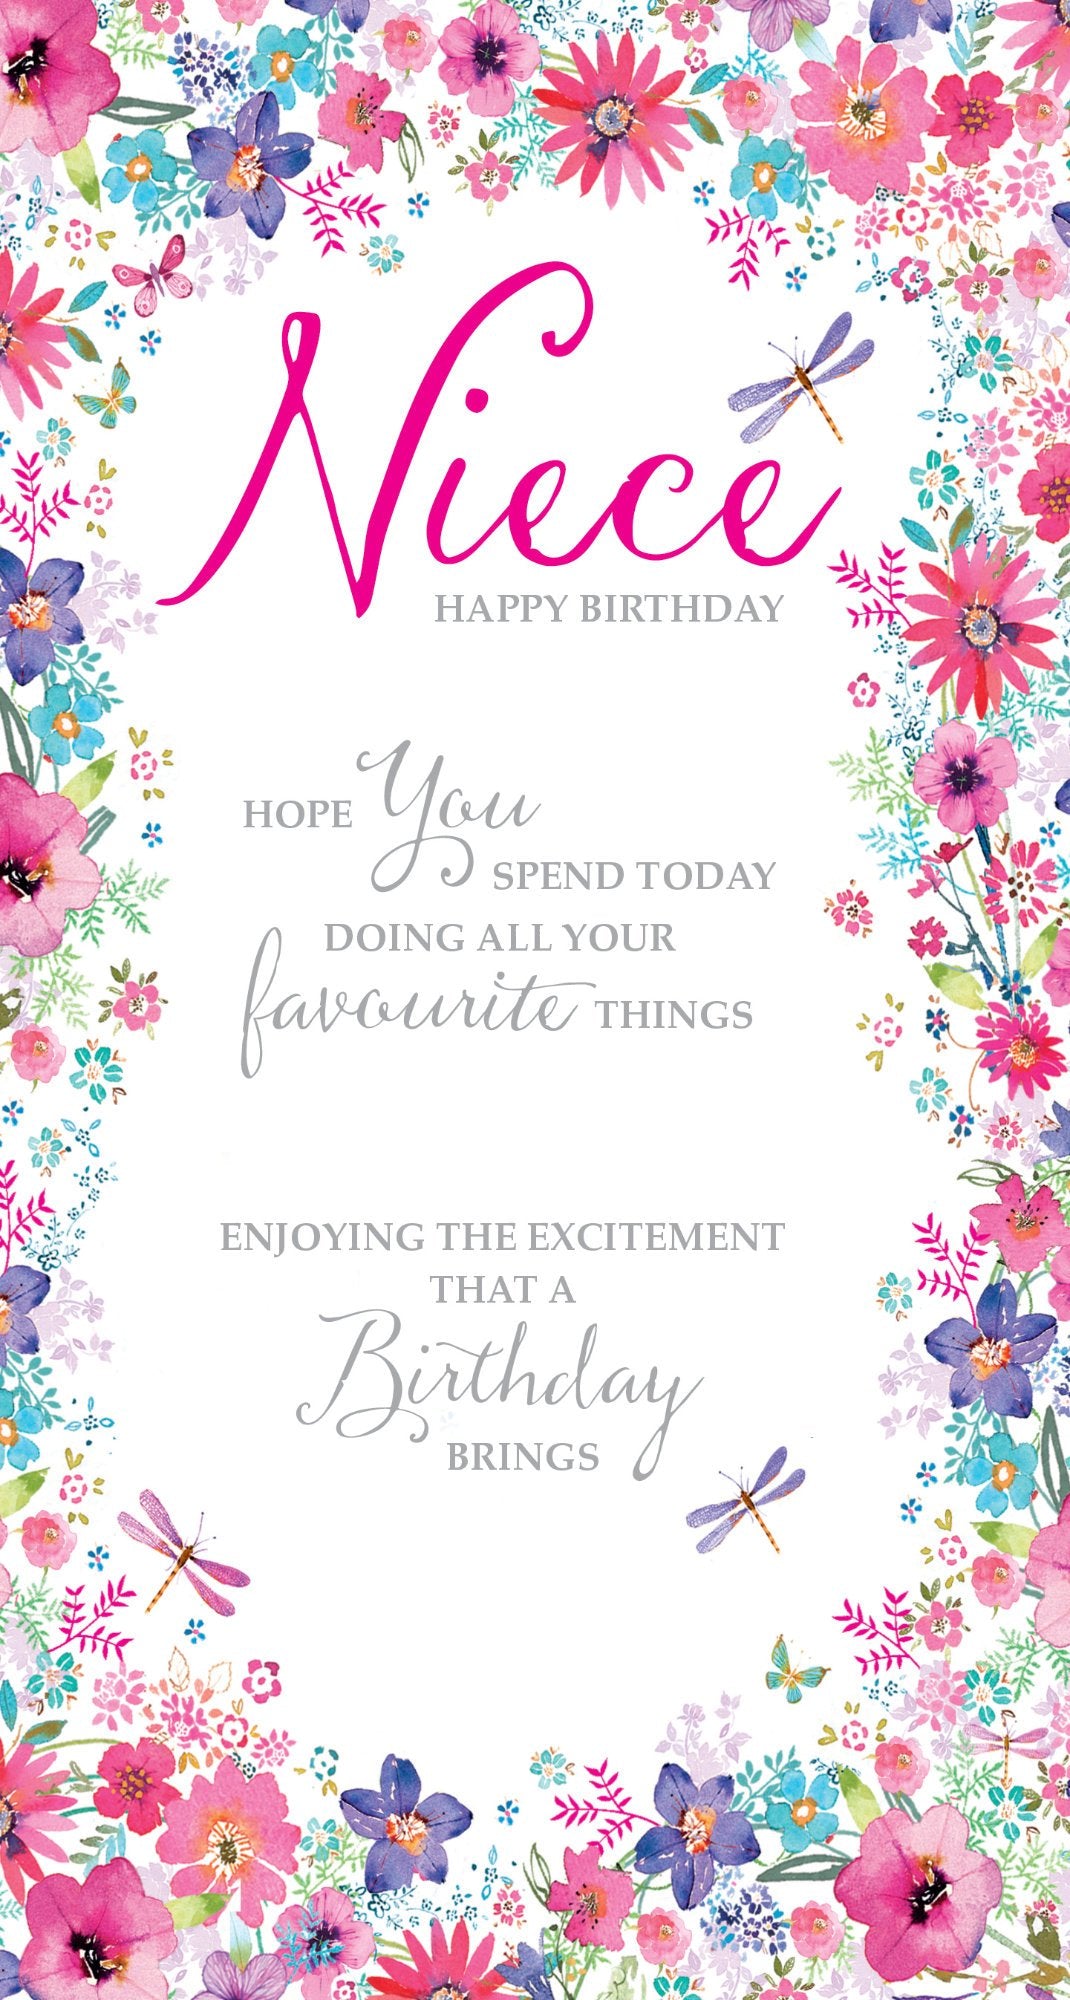 Photograph of Niece Happy Birthday Floral Greetings Card at Nicole's Shop